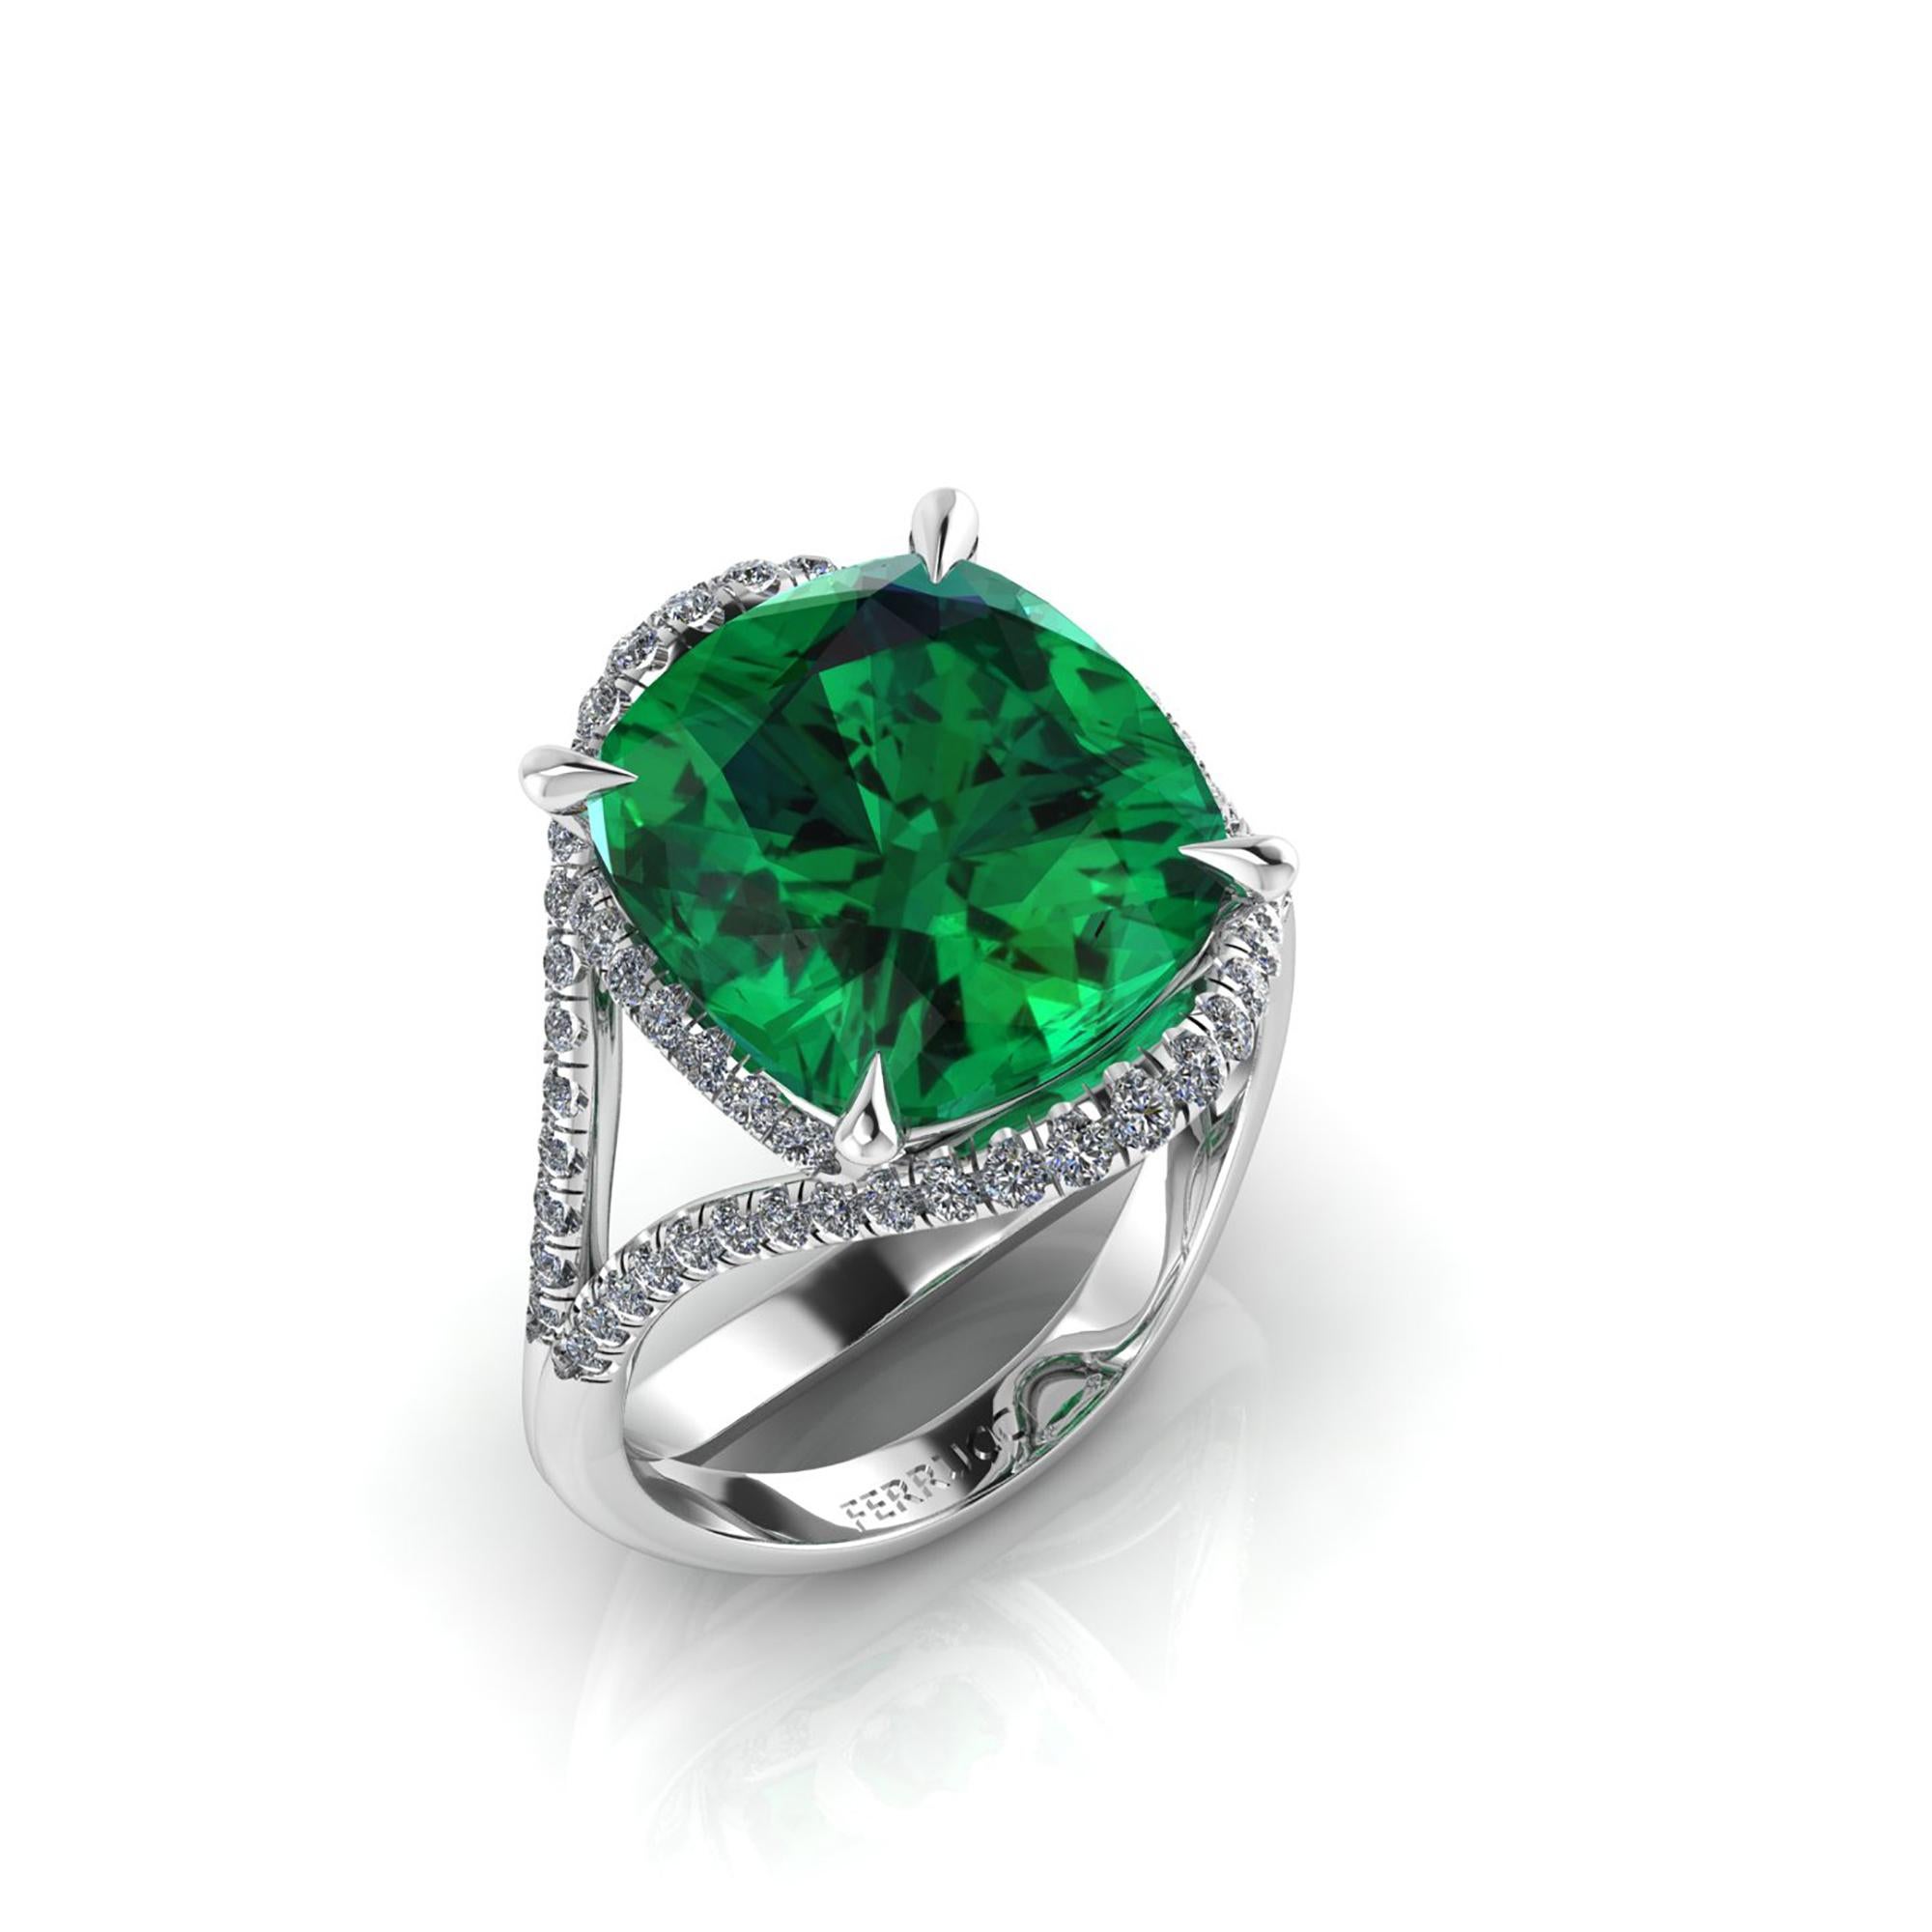  5.42 deep green natural Emerald  GIA Certified, in a one of a kind, hand made Platinum 950, adorned by 0.60 carats of white diamonds pave, designed and conceived in New York City. 
This ring is made to order to guarantee the absolute immaculate